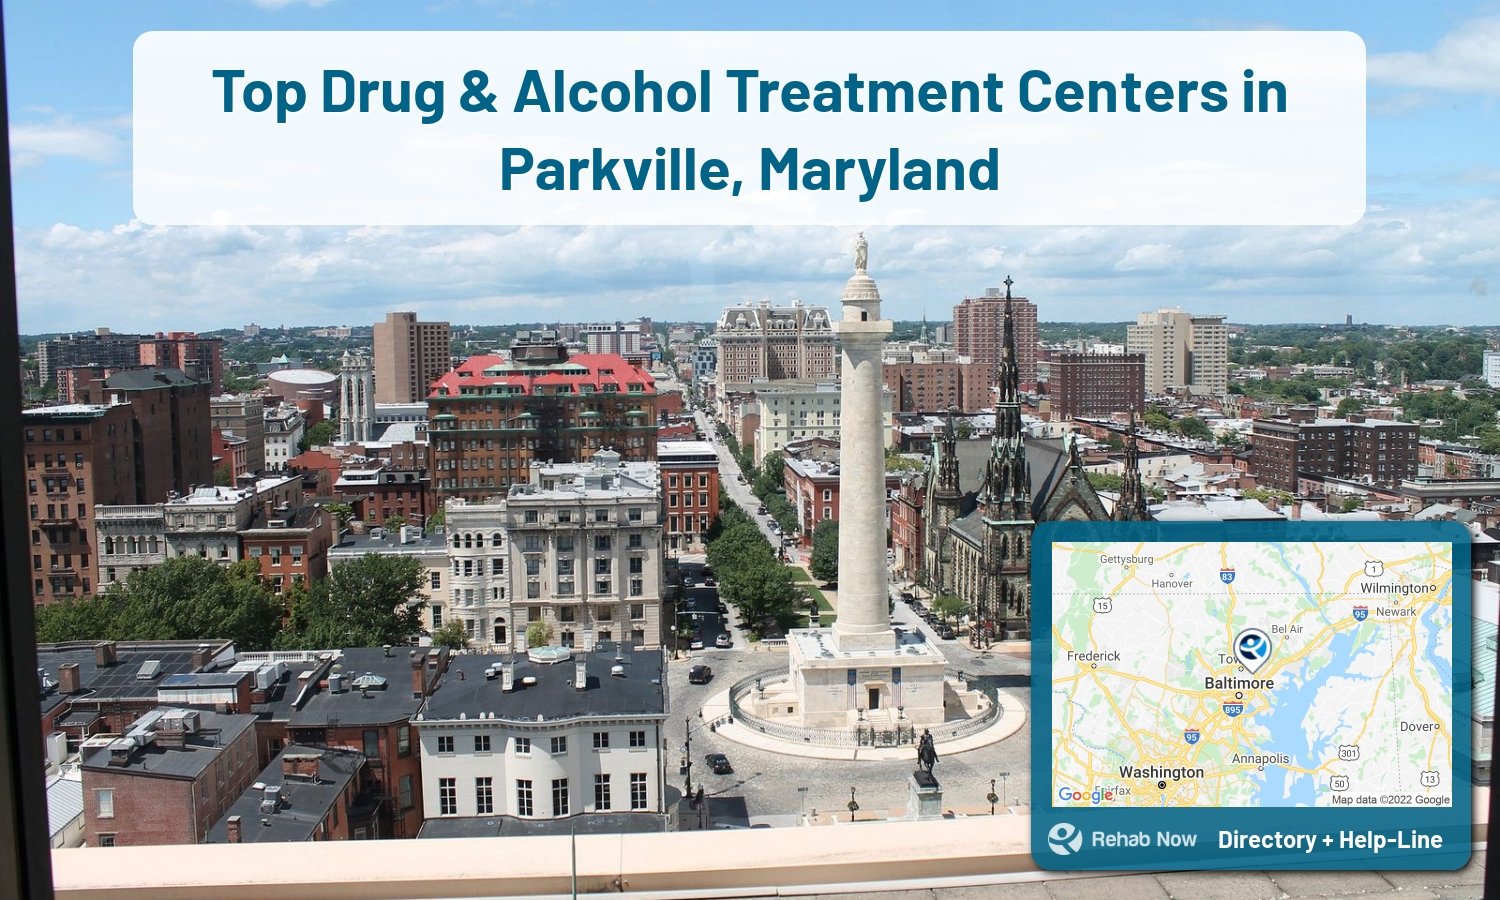 Ready to pick a rehab center in Parkville? Get off alcohol, opiates, and other drugs, by selecting top drug rehab centers in Maryland